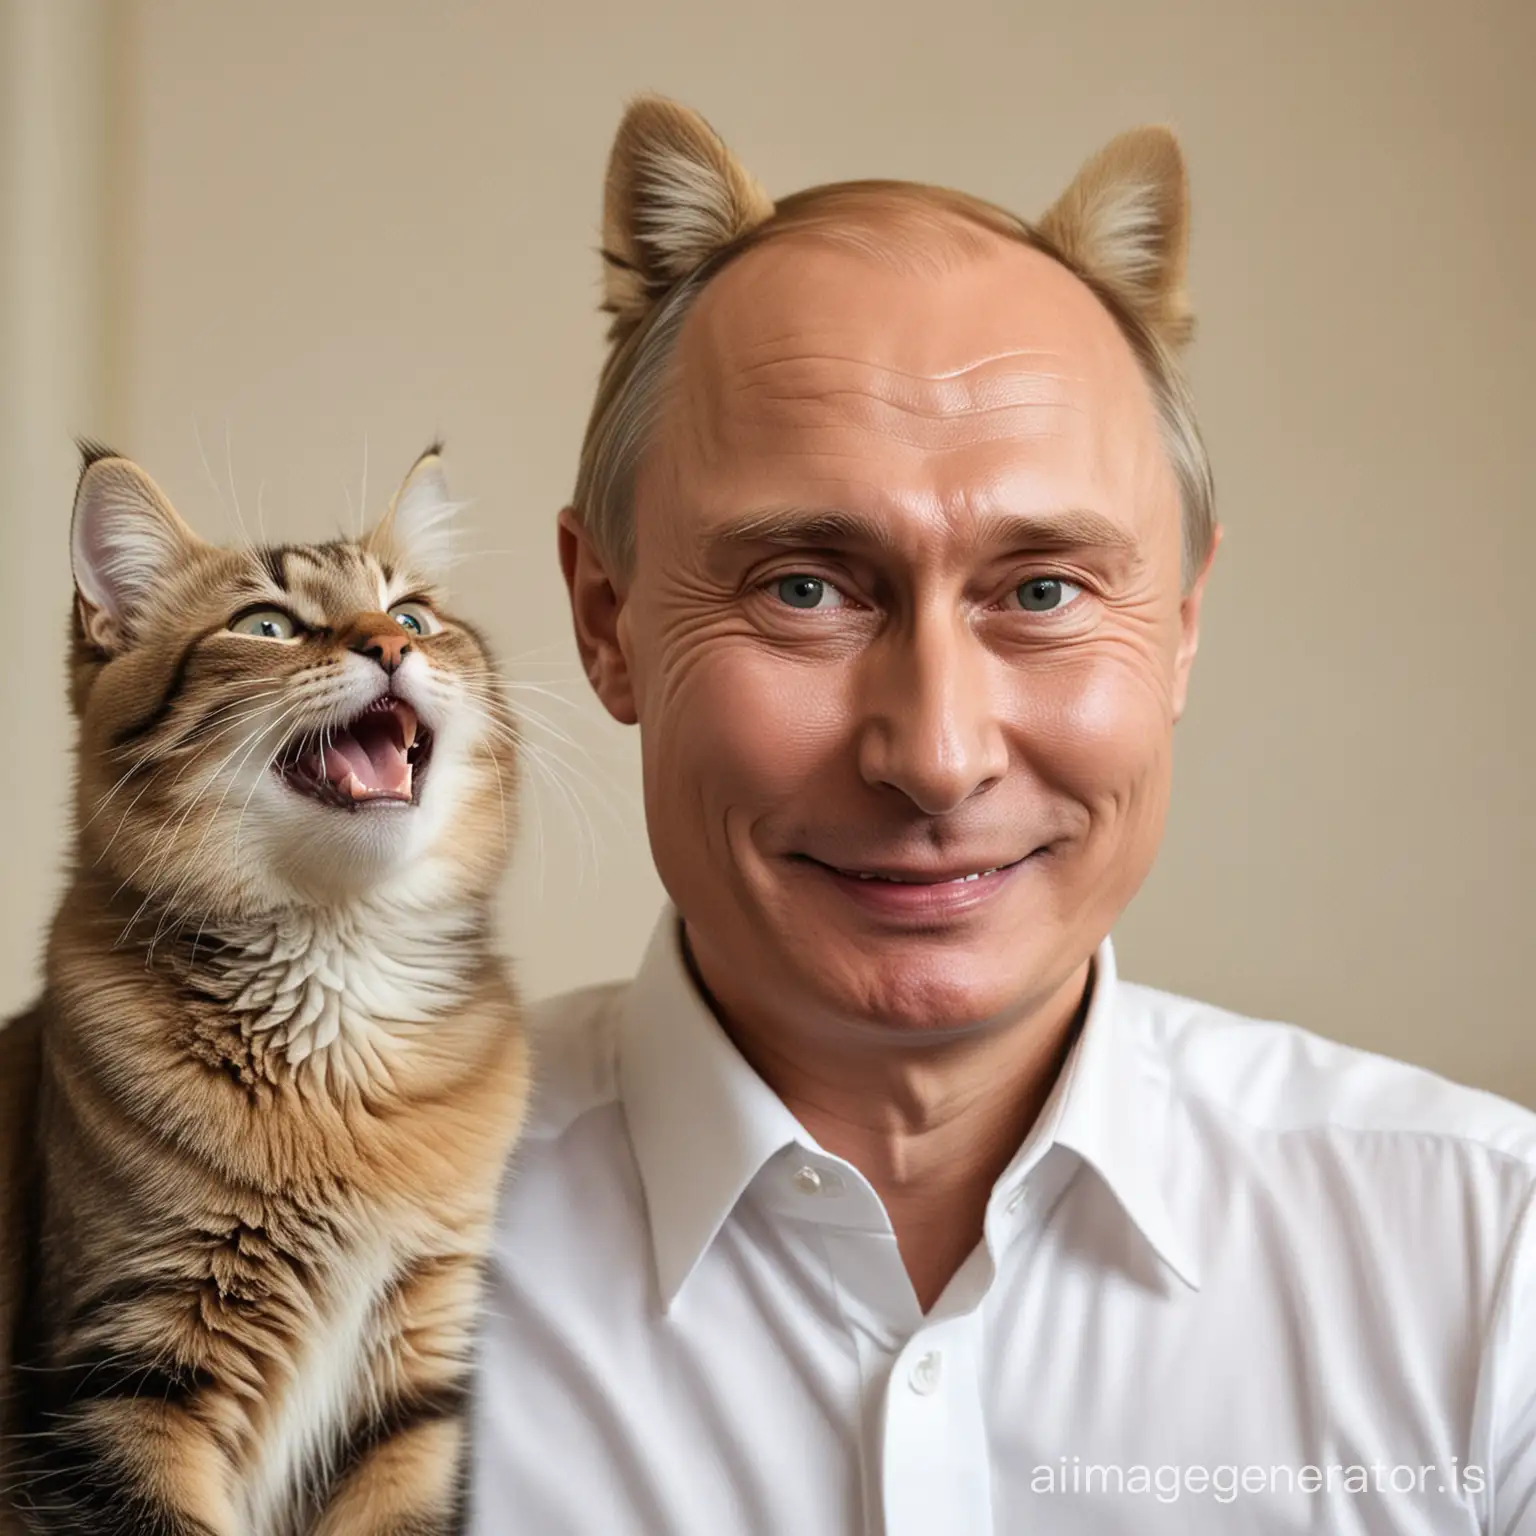 Putin-with-Silly-Grin-Looking-Up-at-Cat-on-His-Head